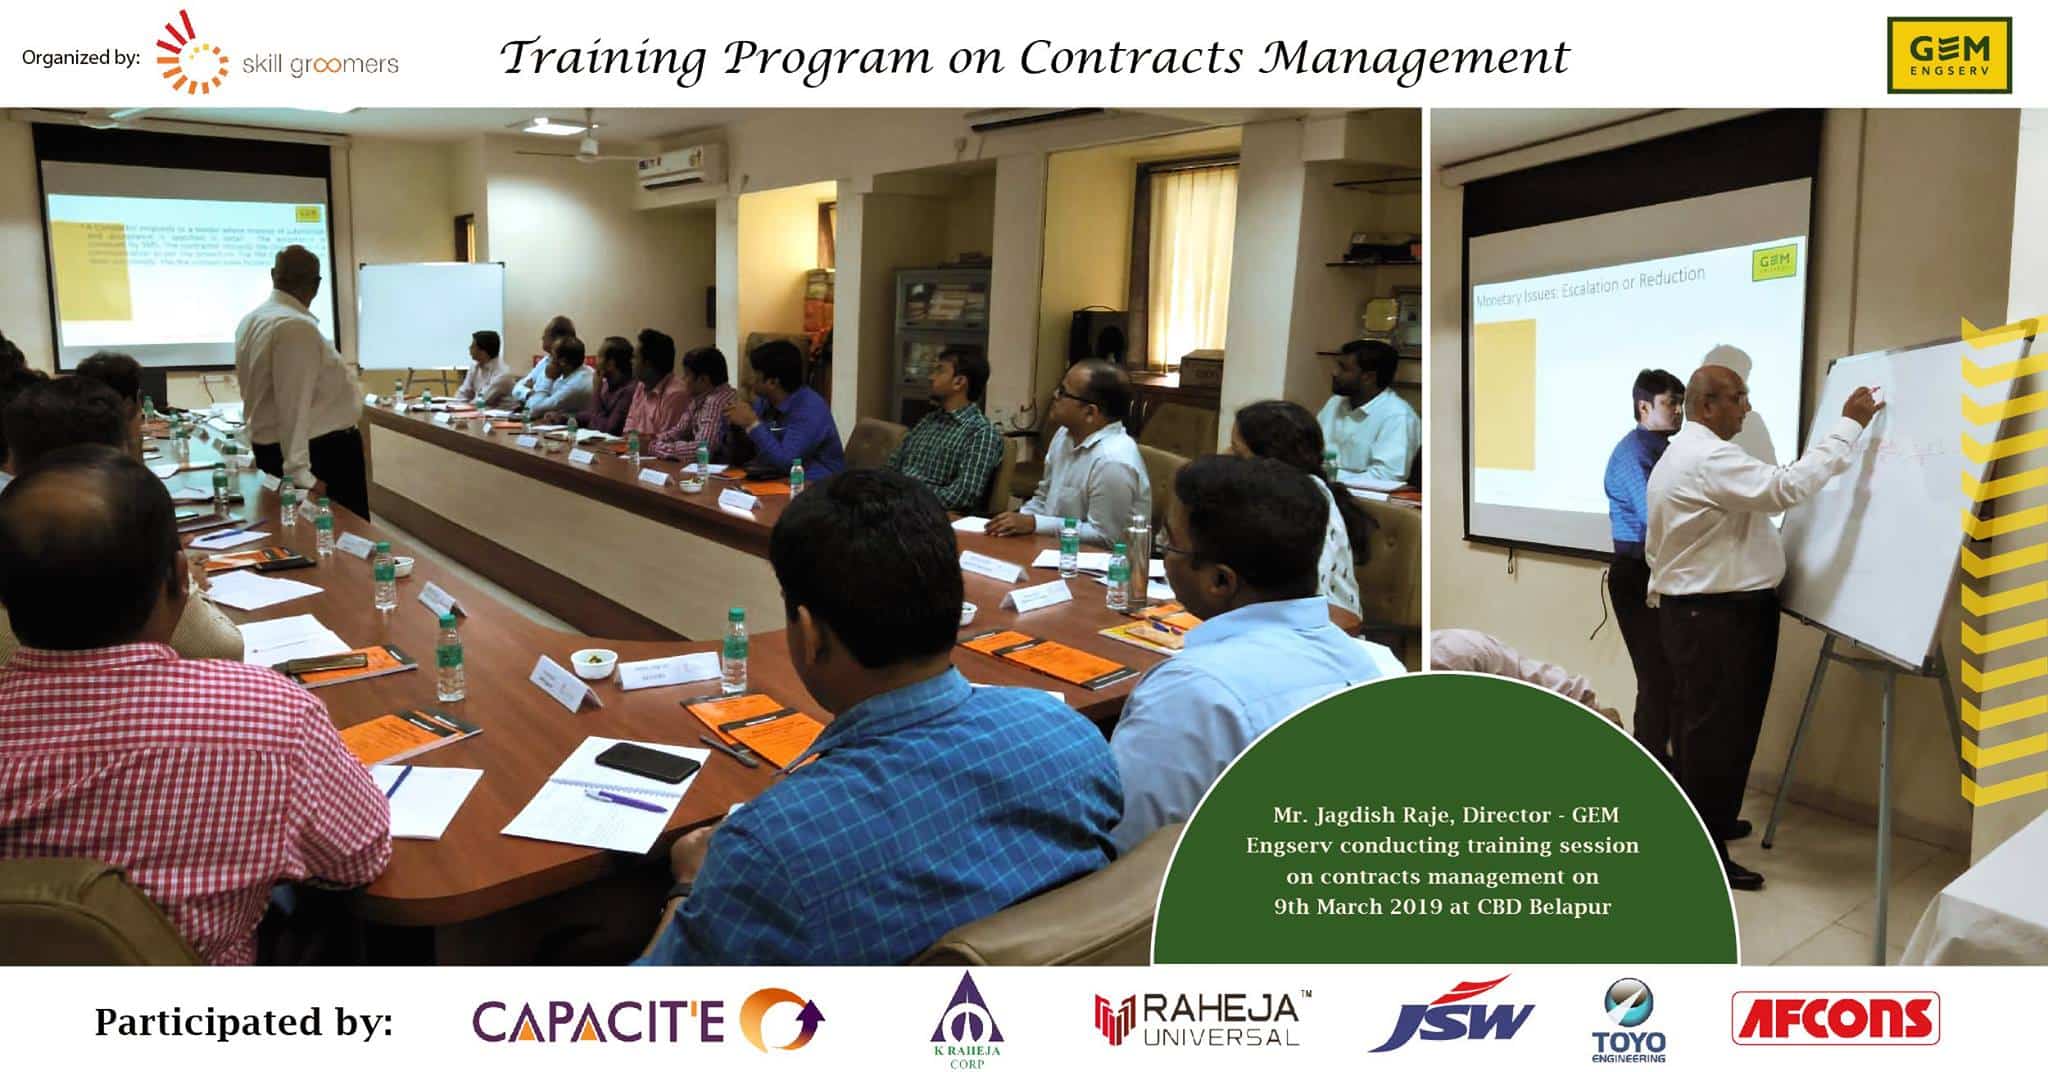 Training Program on Contracts Management